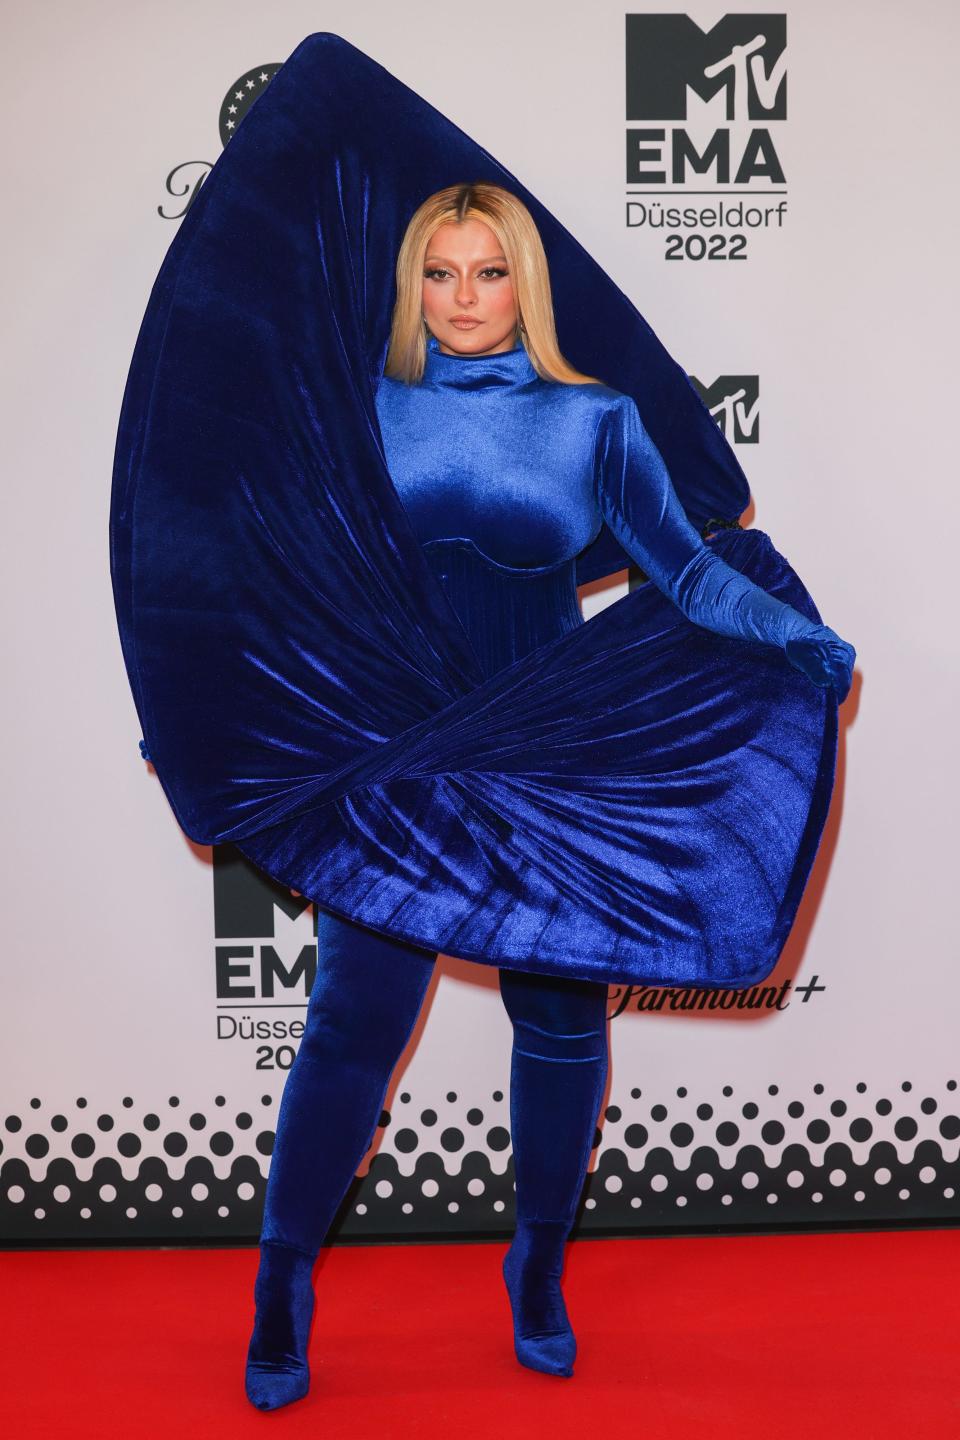 Bebe Rexha attends the red carpet during the MTV Europe Music Awards 2022 held at PSD Bank Dome on November 13, 2022